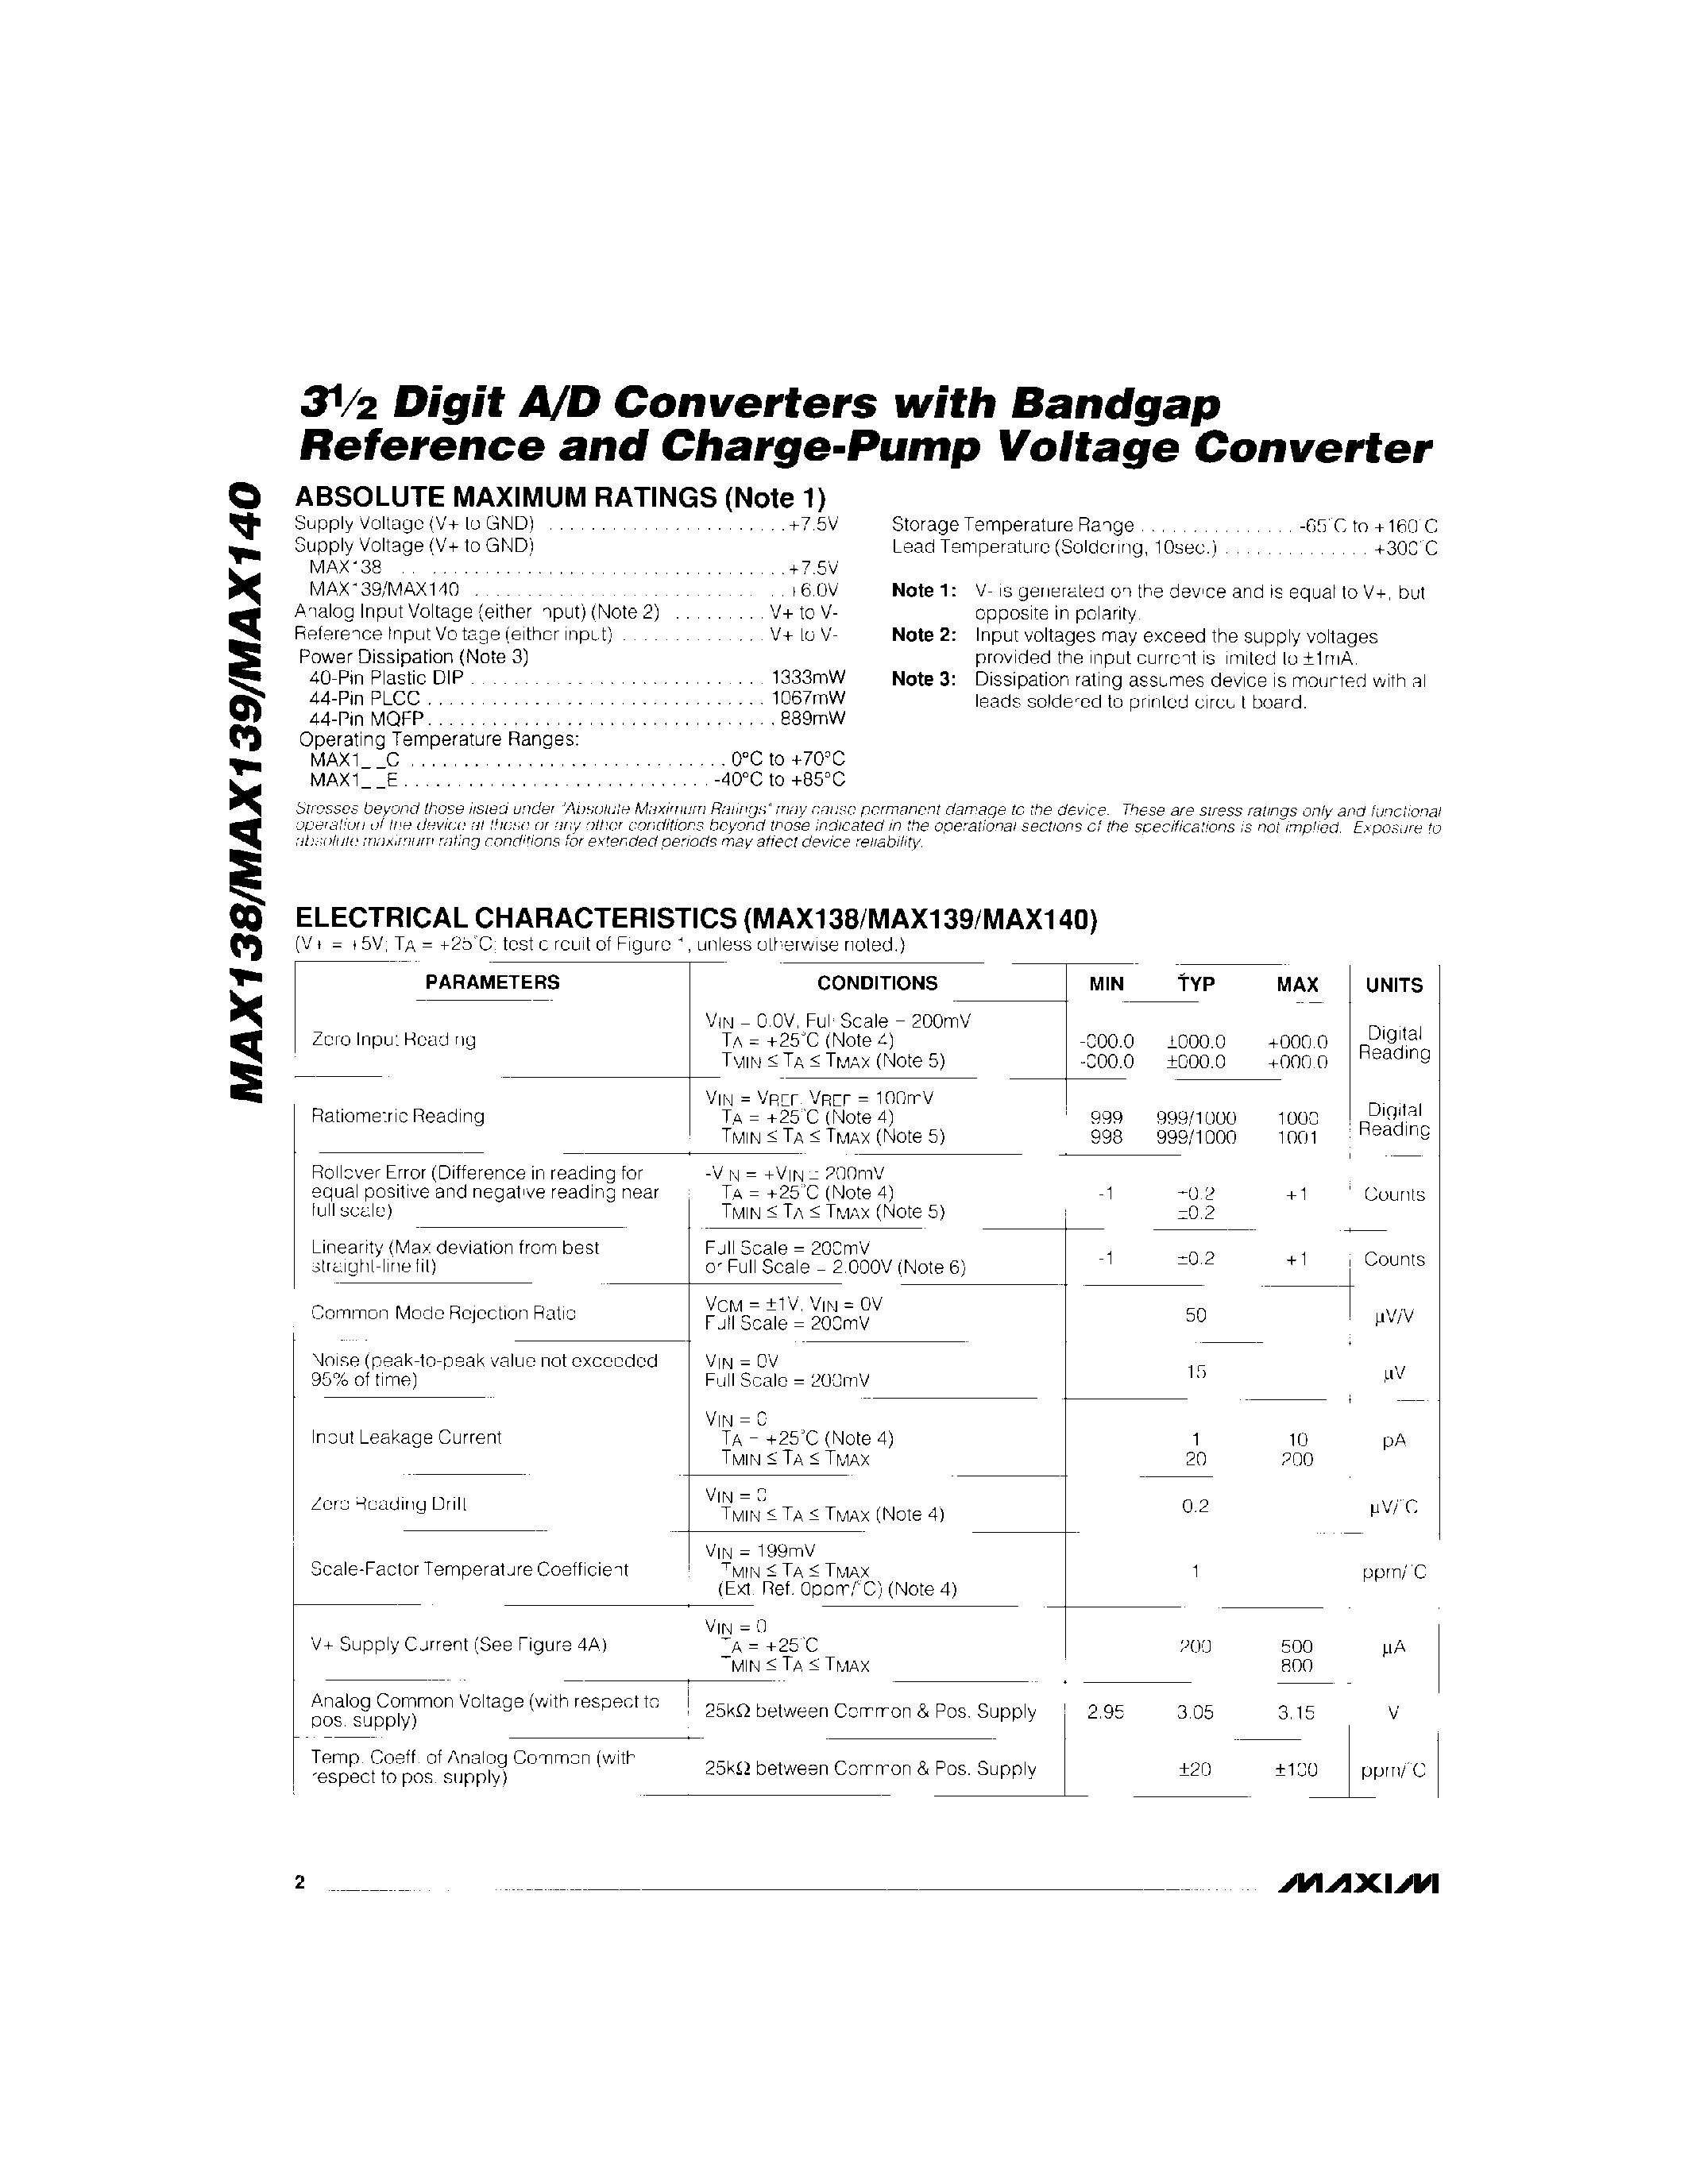 Datasheet MAX139C/D - 3Digit A/D Converters with Bandgap Refrence and Charge-Pump Voltage Converter page 2